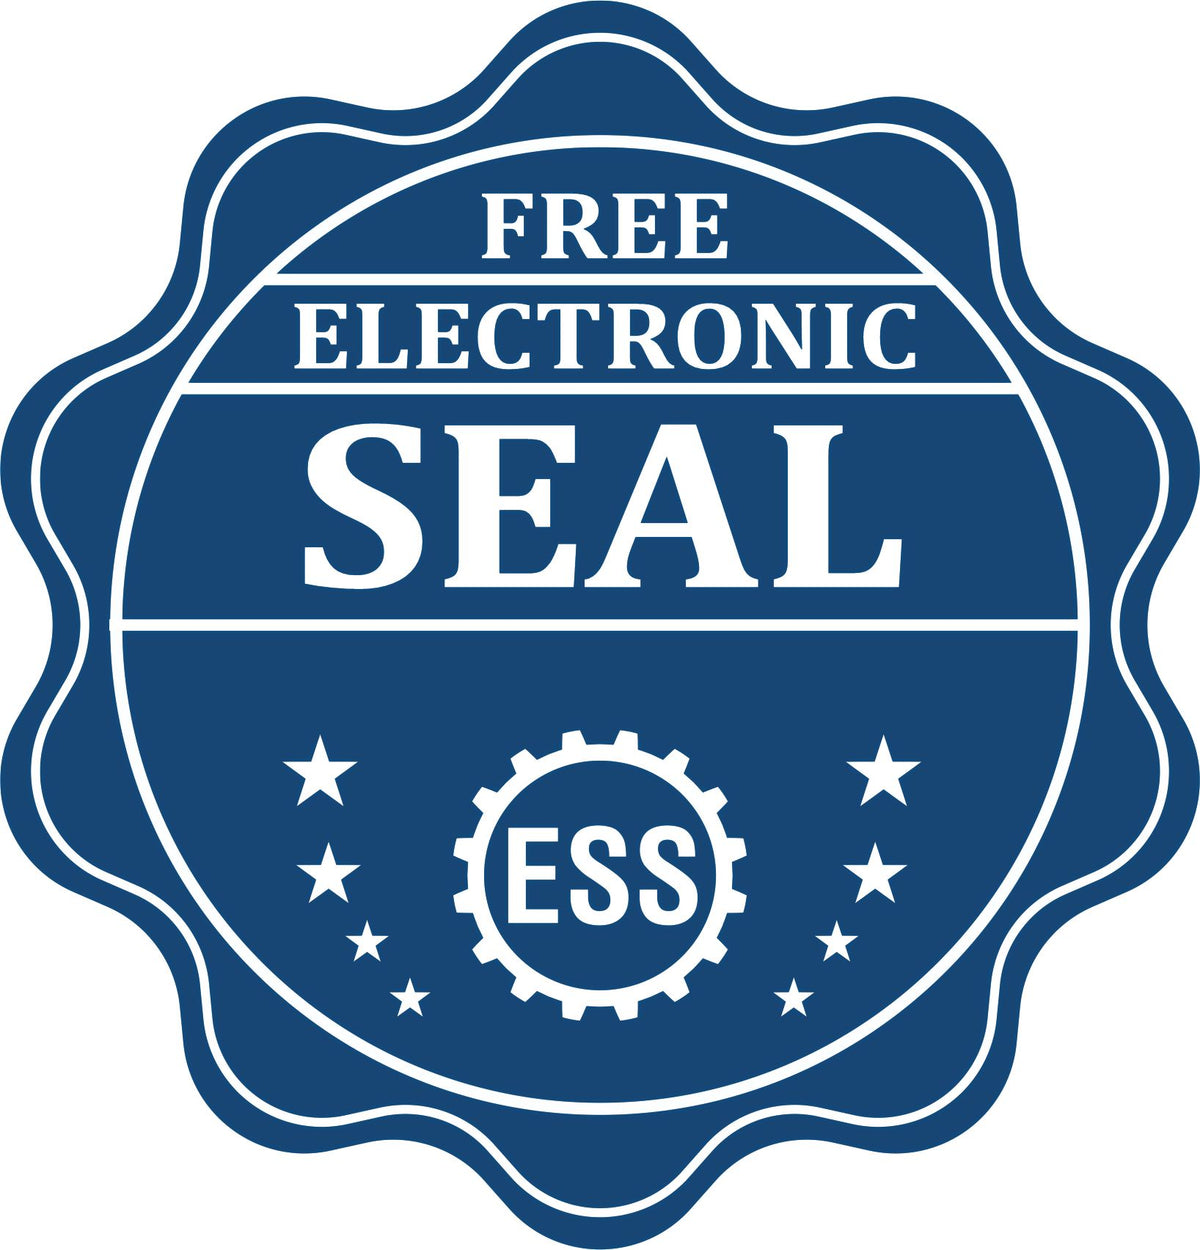 A badge showing a free electronic seal for the Slim Pre-Inked Delaware Professional Engineer Seal Stamp with stars and the ESS gear on the emblem.